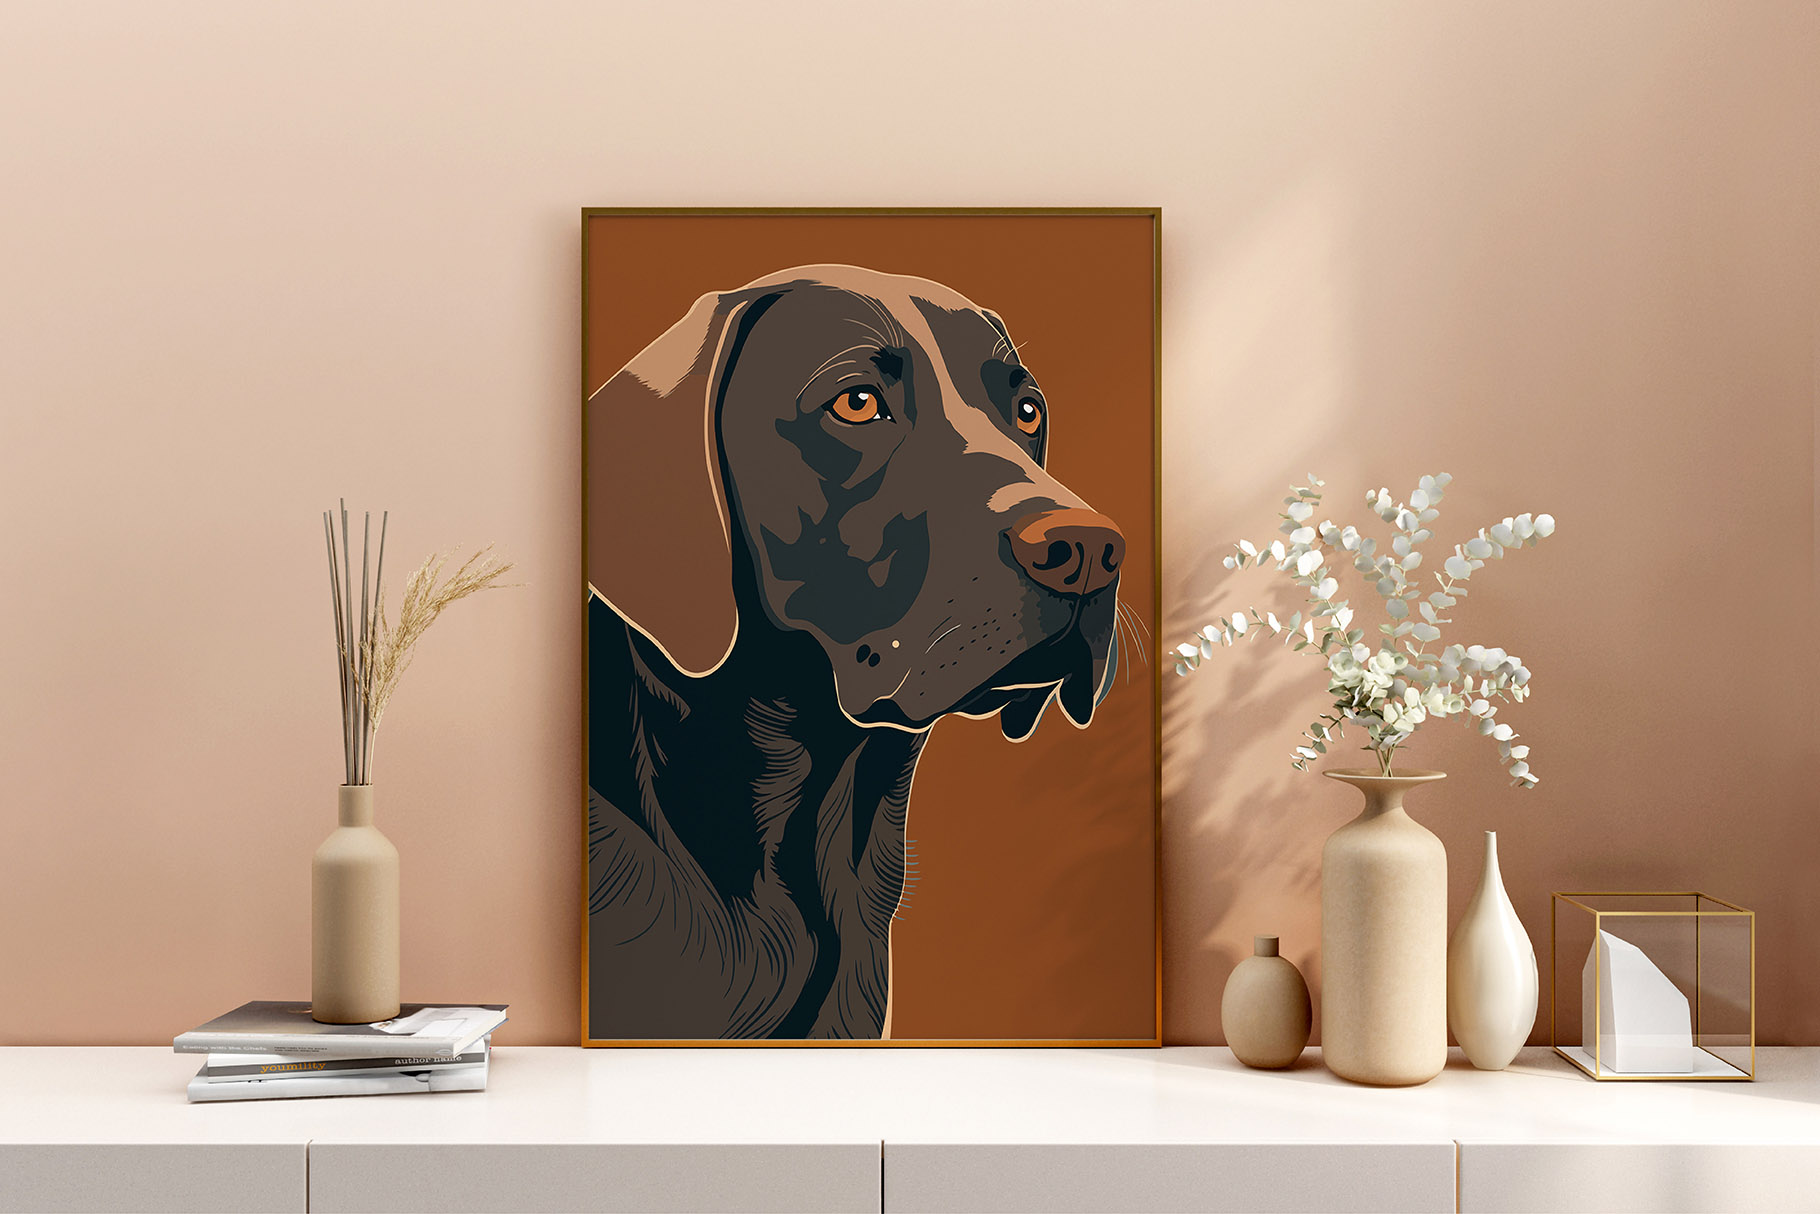 Painting of a dog on a wall.